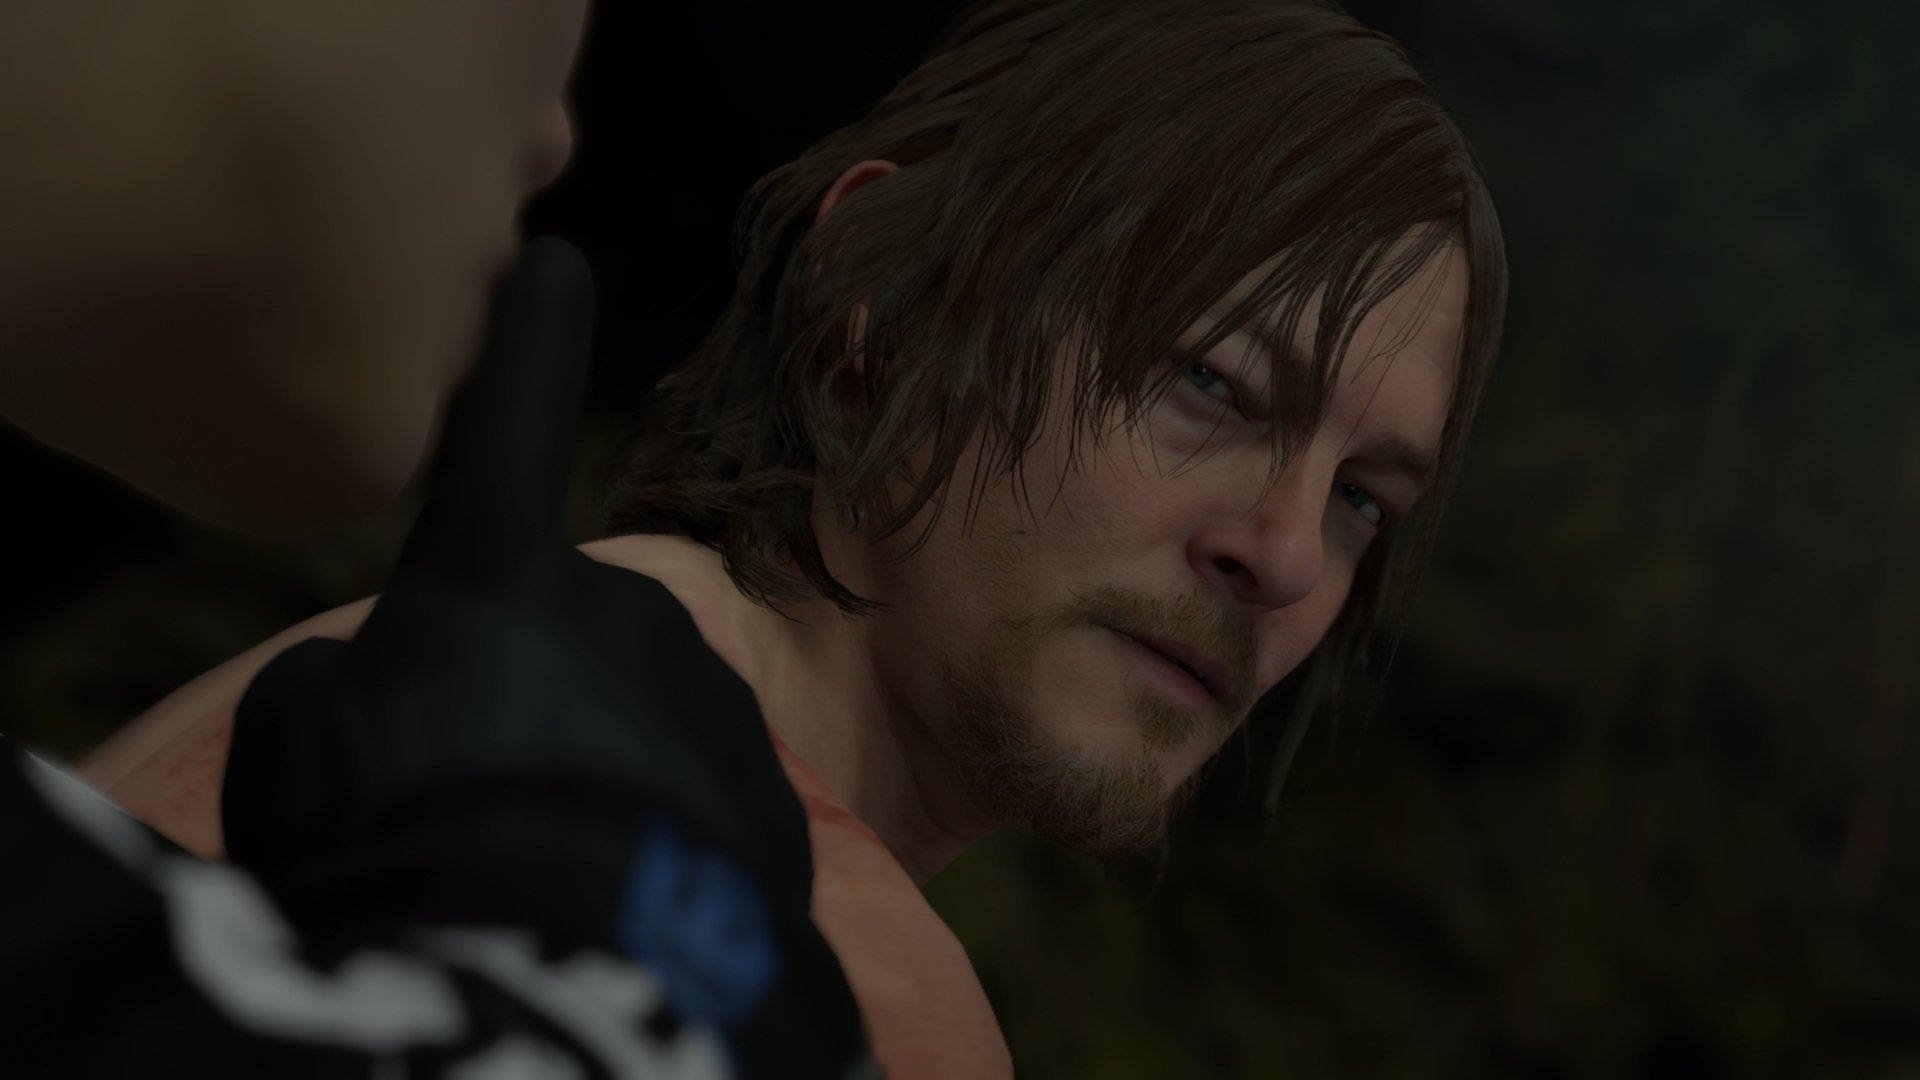 Death Stranding: Director's Cut announced for PS5 - Polygon